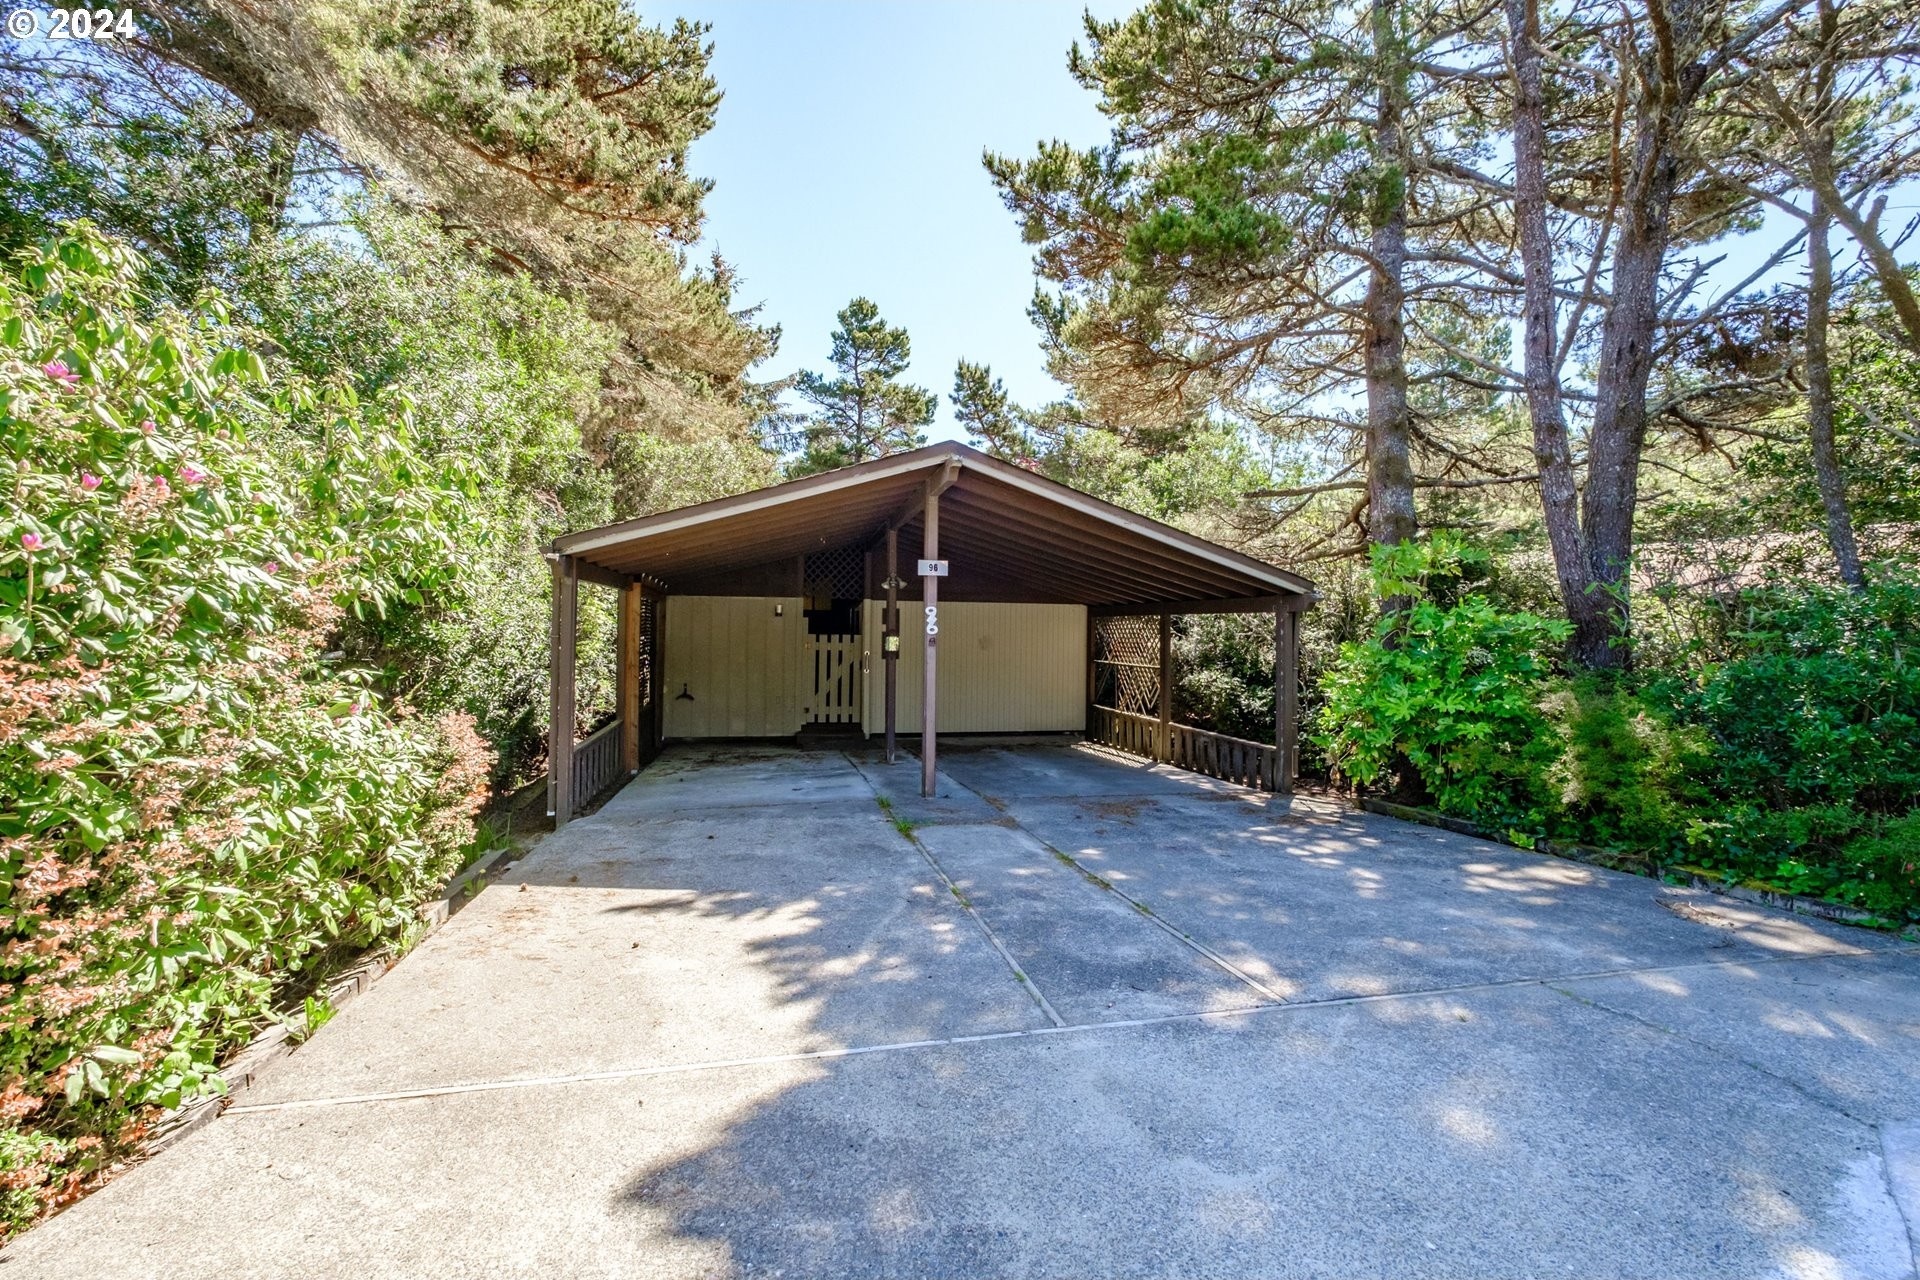 1. 1600 Rhododendron Dr